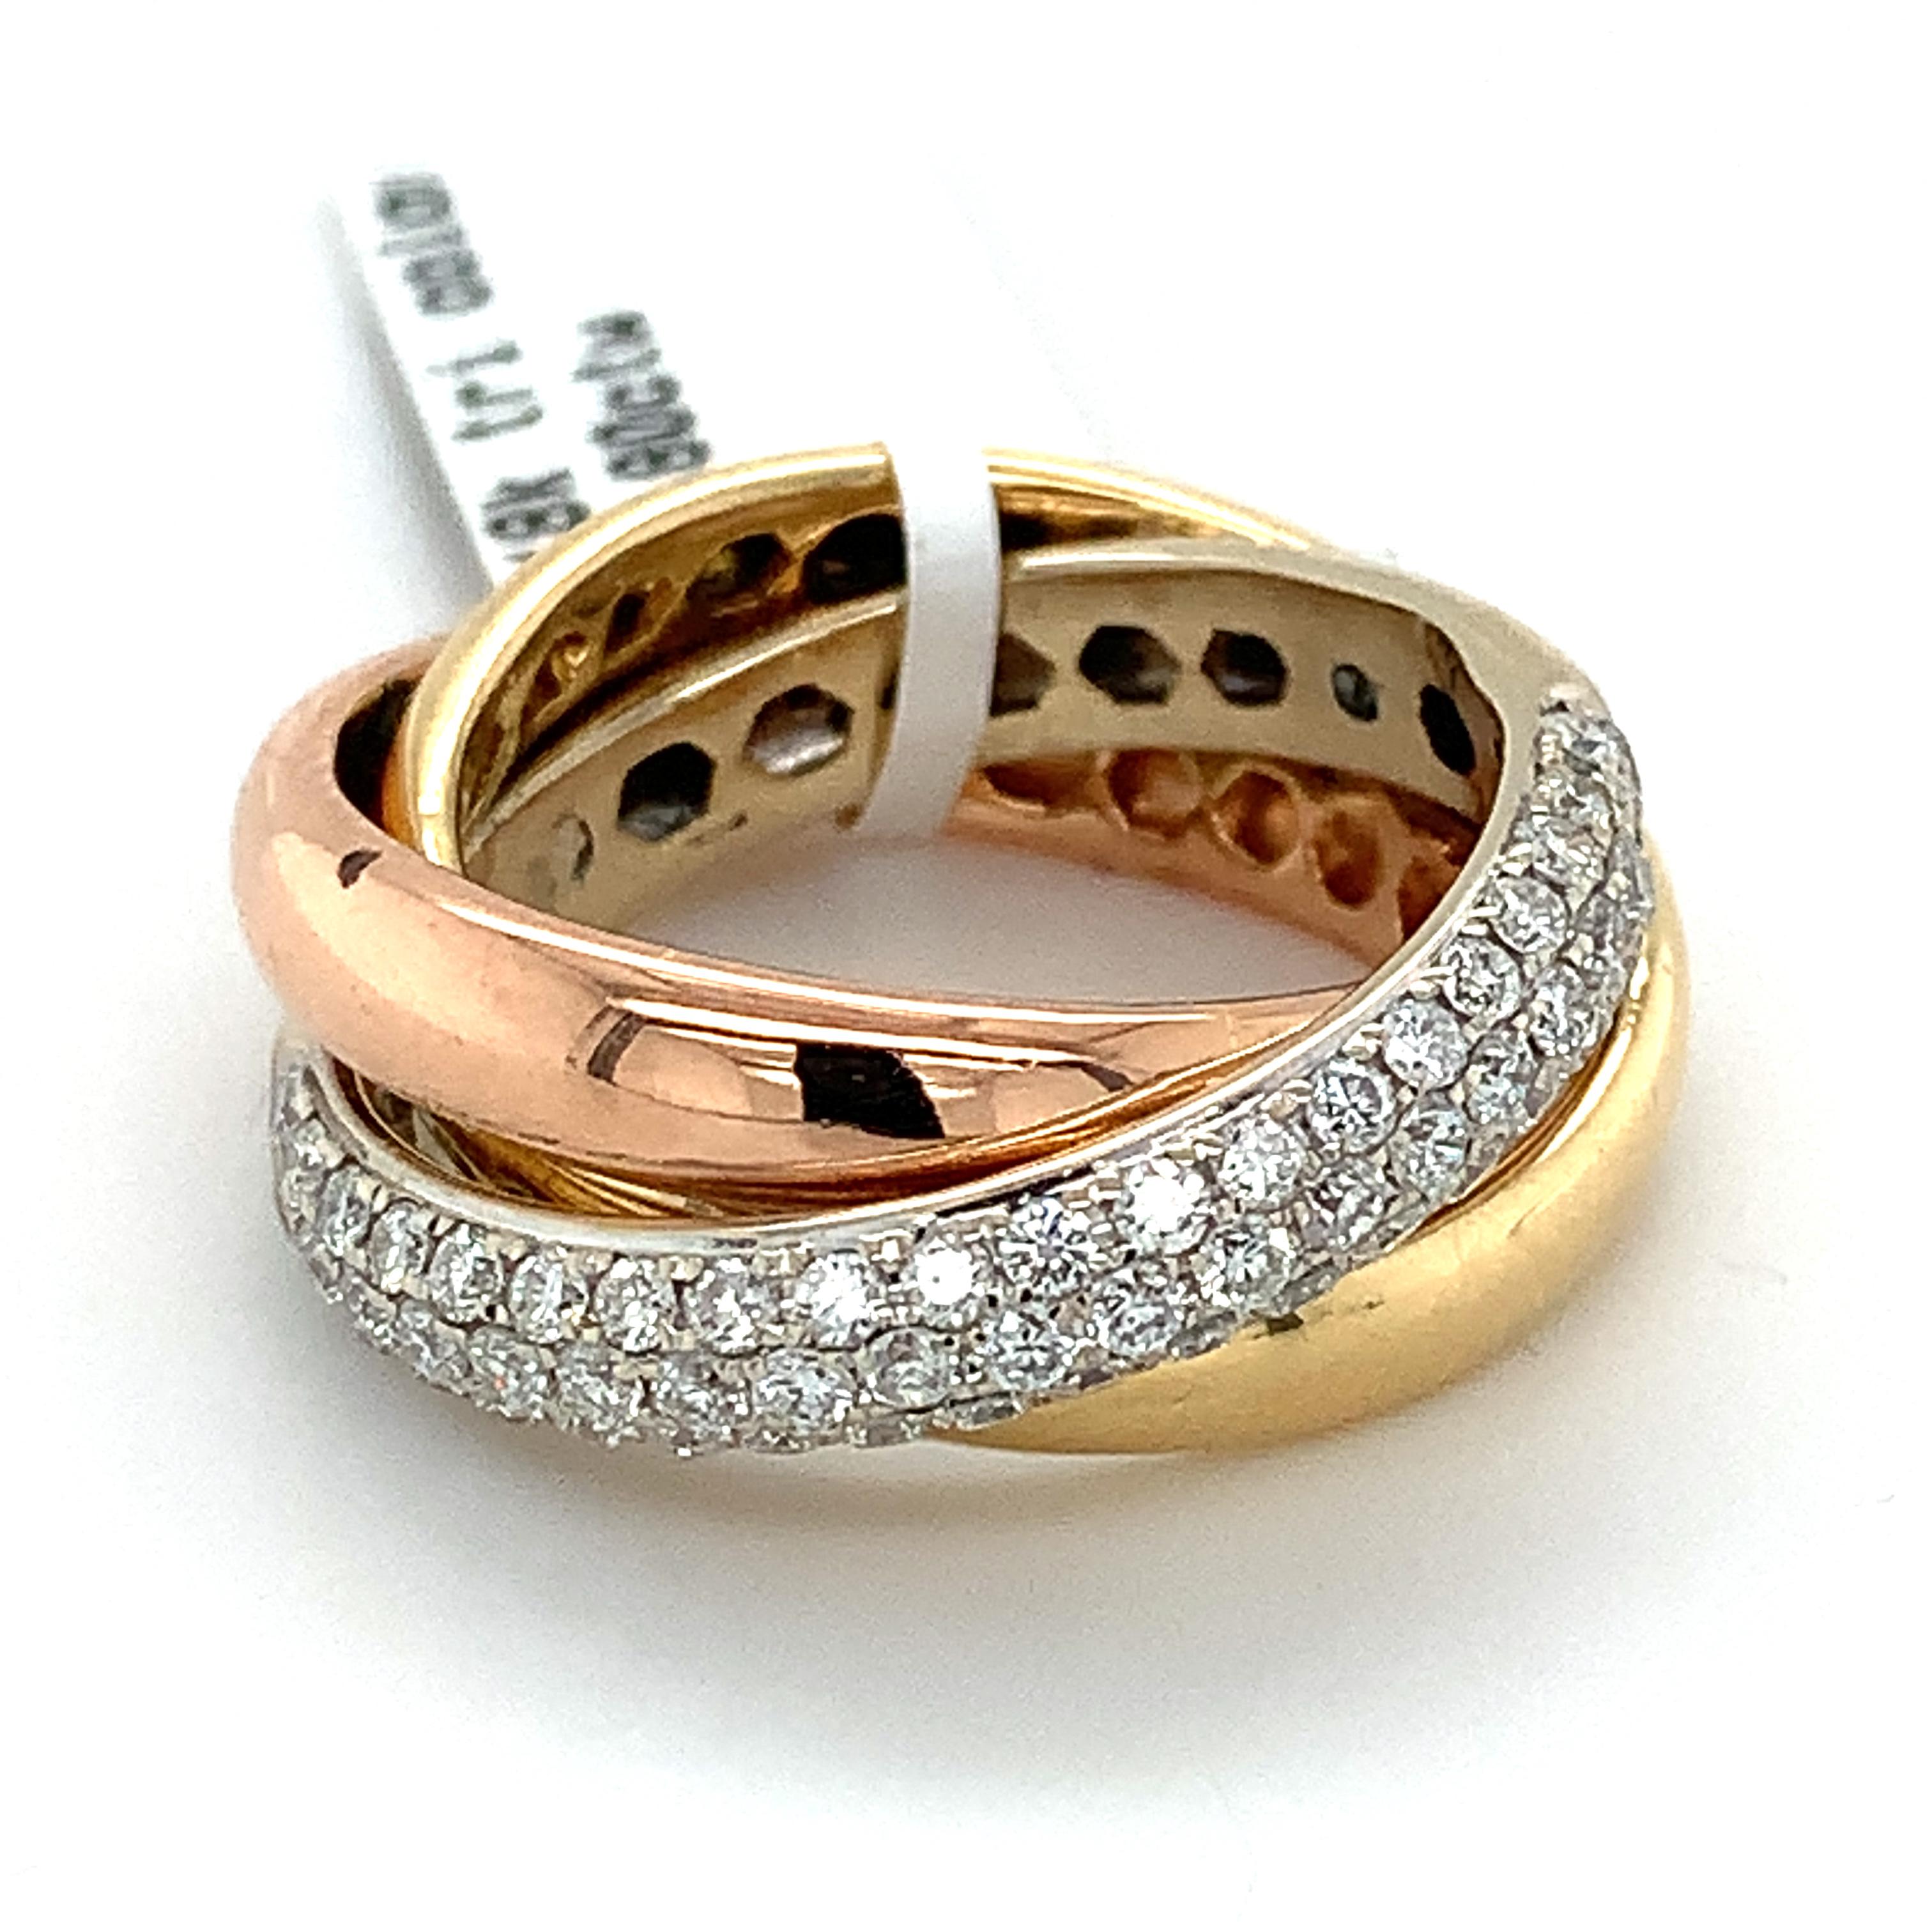 18k Rose White and Yellow Gold White Diamond Rolling Band Ring
Size 5
9.0 Grams
White Round Brilliant Cut Diamonds .8 Carats Total Weight
Color: F-G Clarity: VS-SI

this ring is a timeless tri color gold band. The rings don't actually roll. The